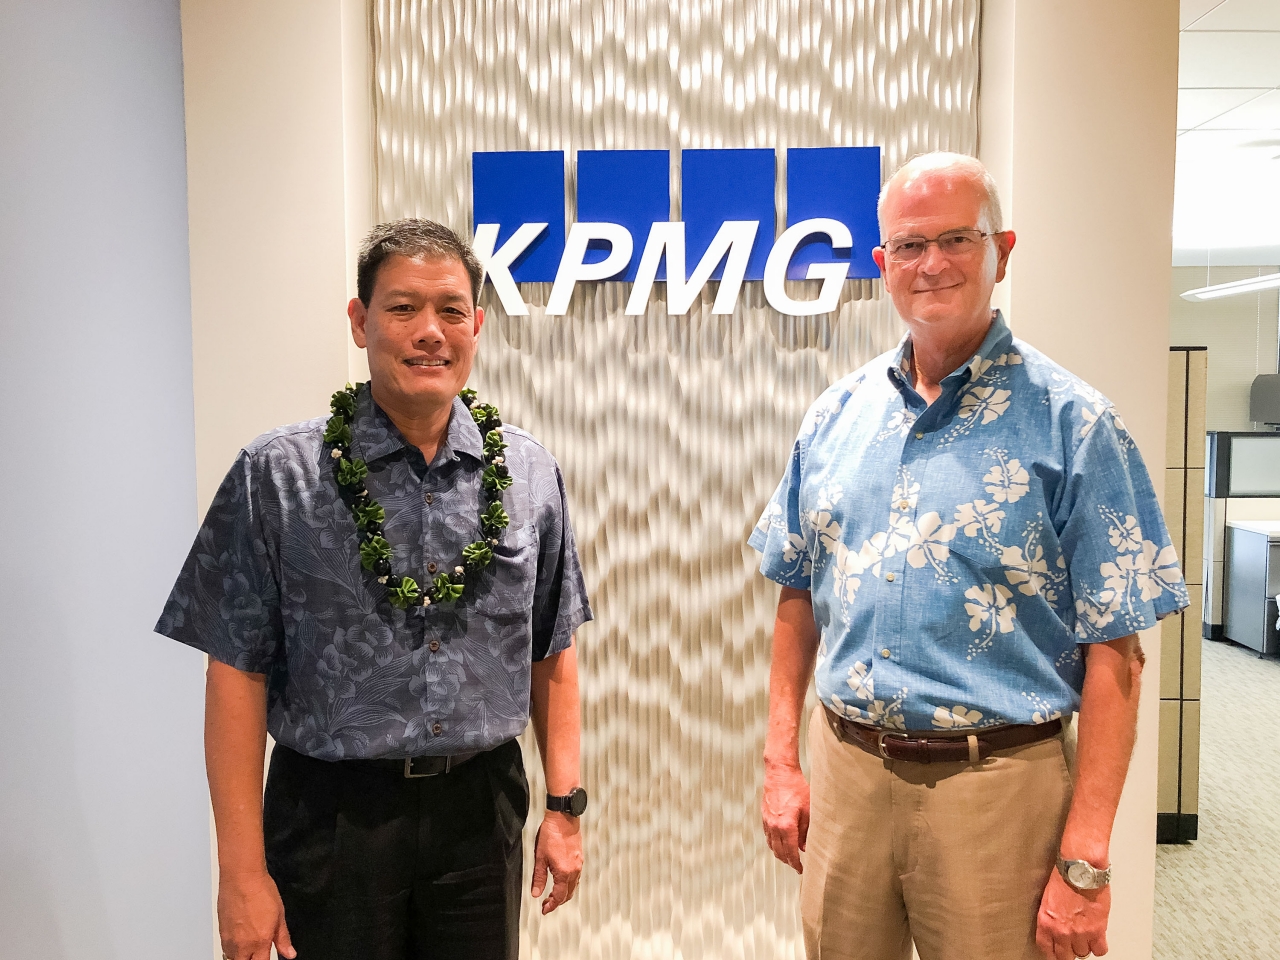 From left: Nelson Lau, office managing partner at KPMG and Vance Roley, dean of the Shidler College of Business. 